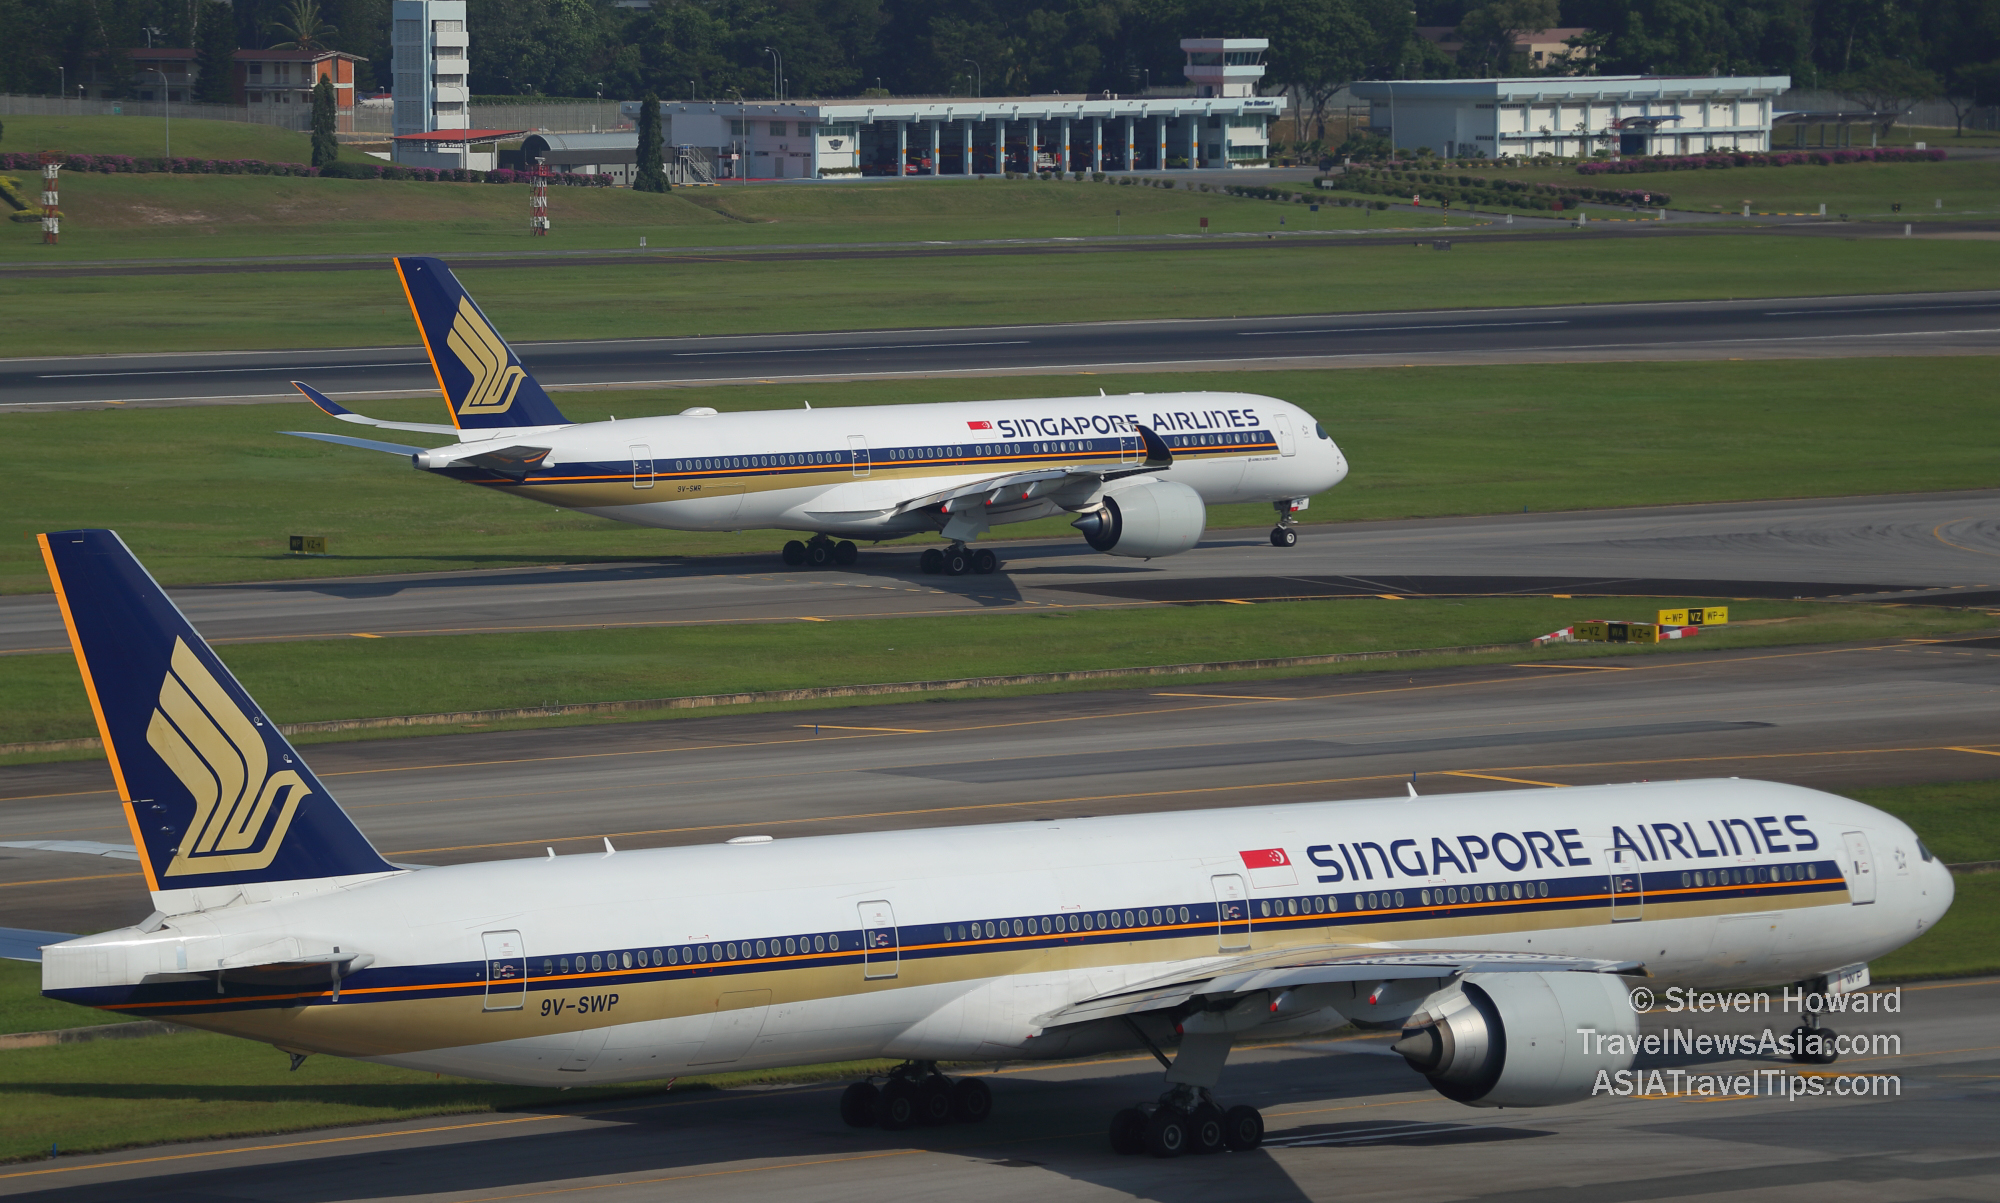 Singapore Airlines aircraft at Changi Airport. Picture by Steven Howard of TravelNewsAsia.com Click to enlarge.